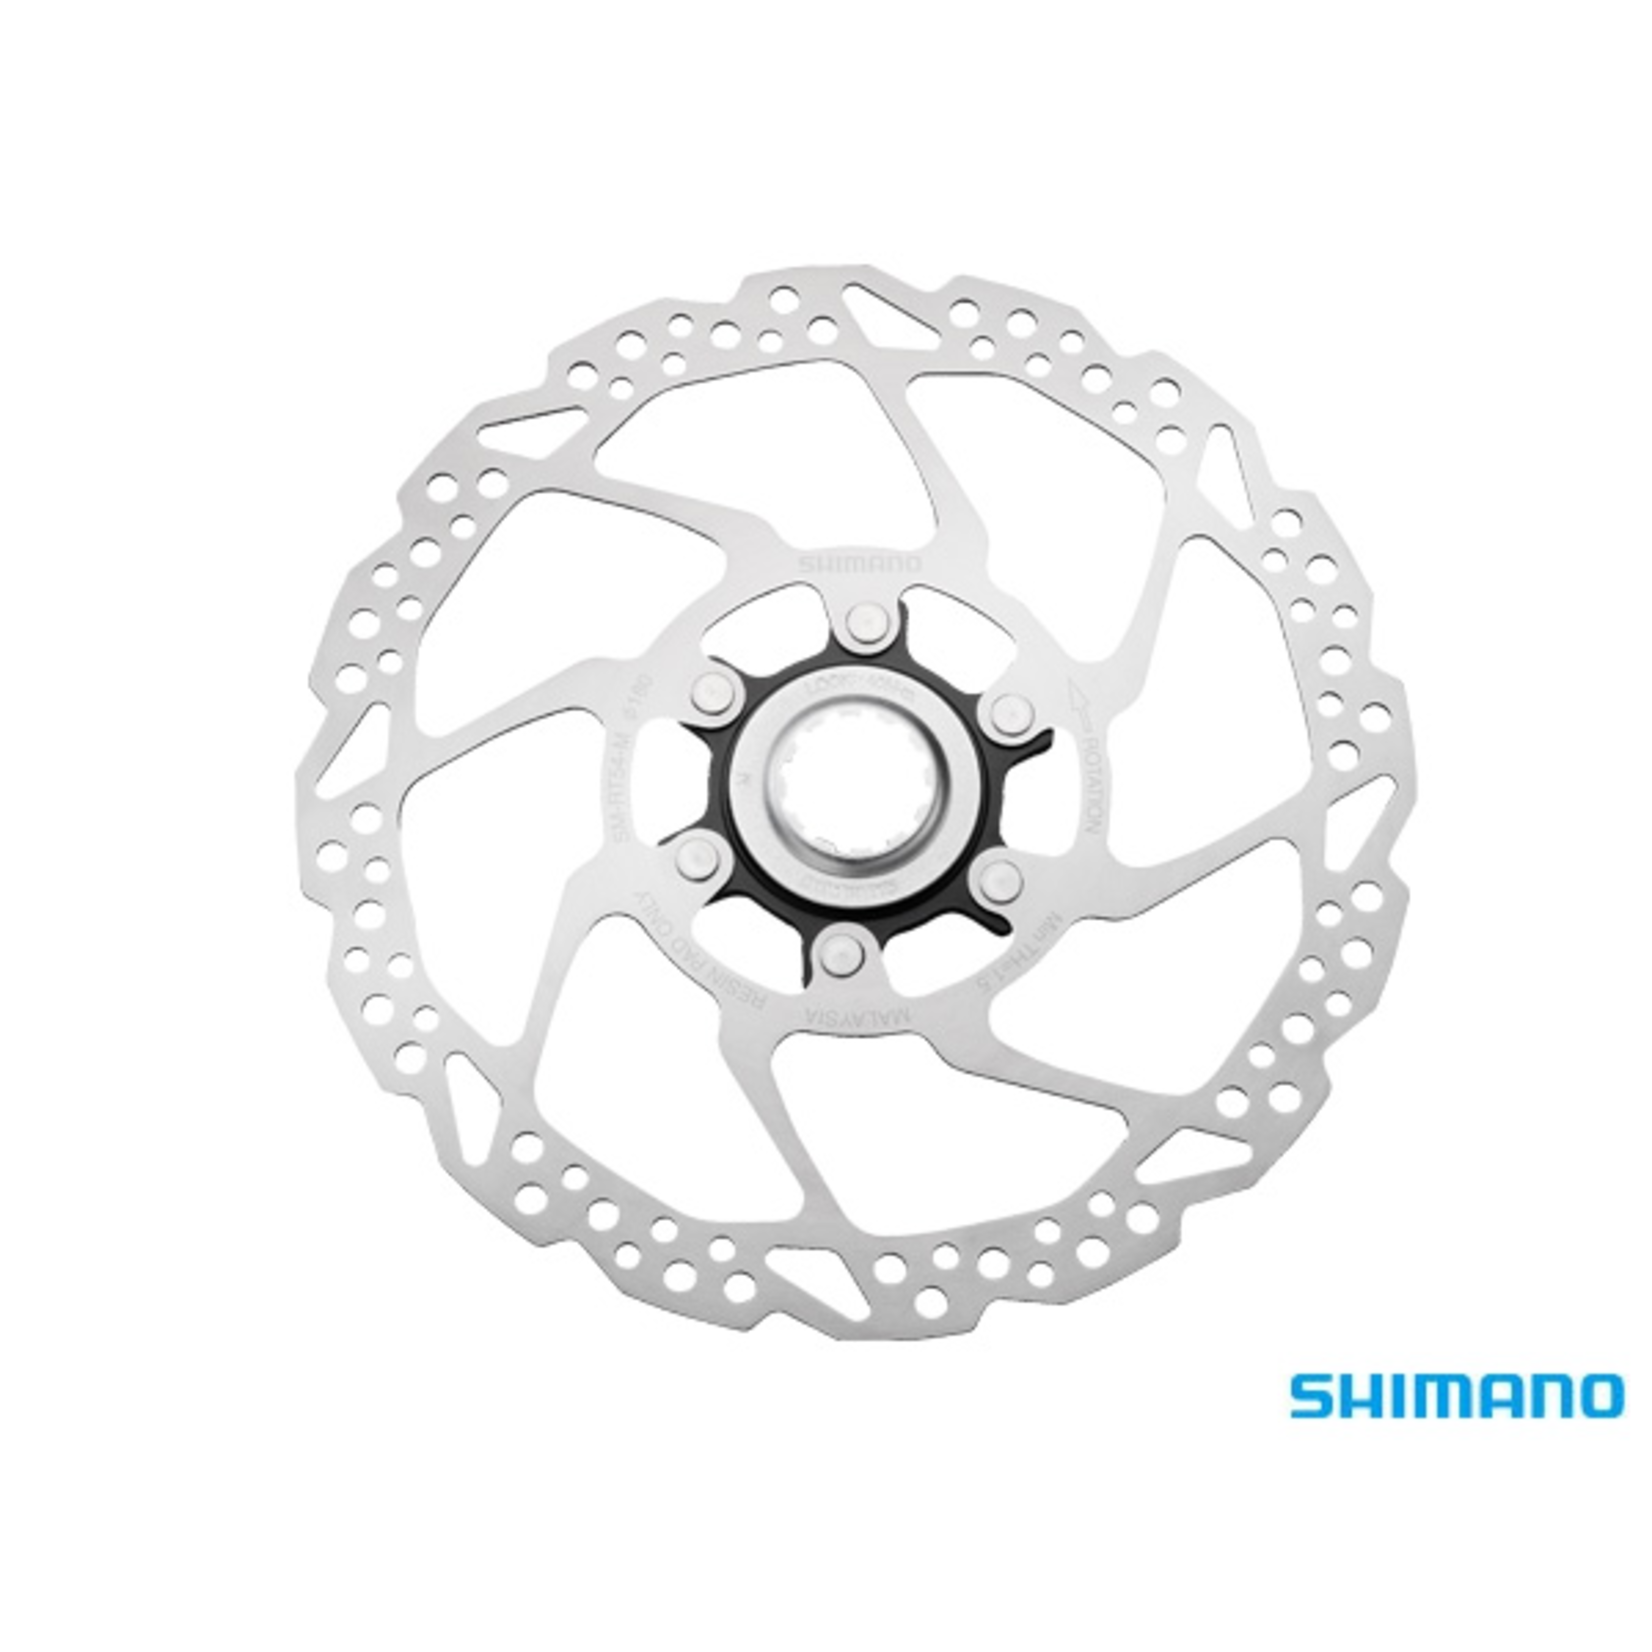 SHIMANO DISC ROTOR SM-RT54 160mm DEORE CENTERLOCK for RESIN PAD